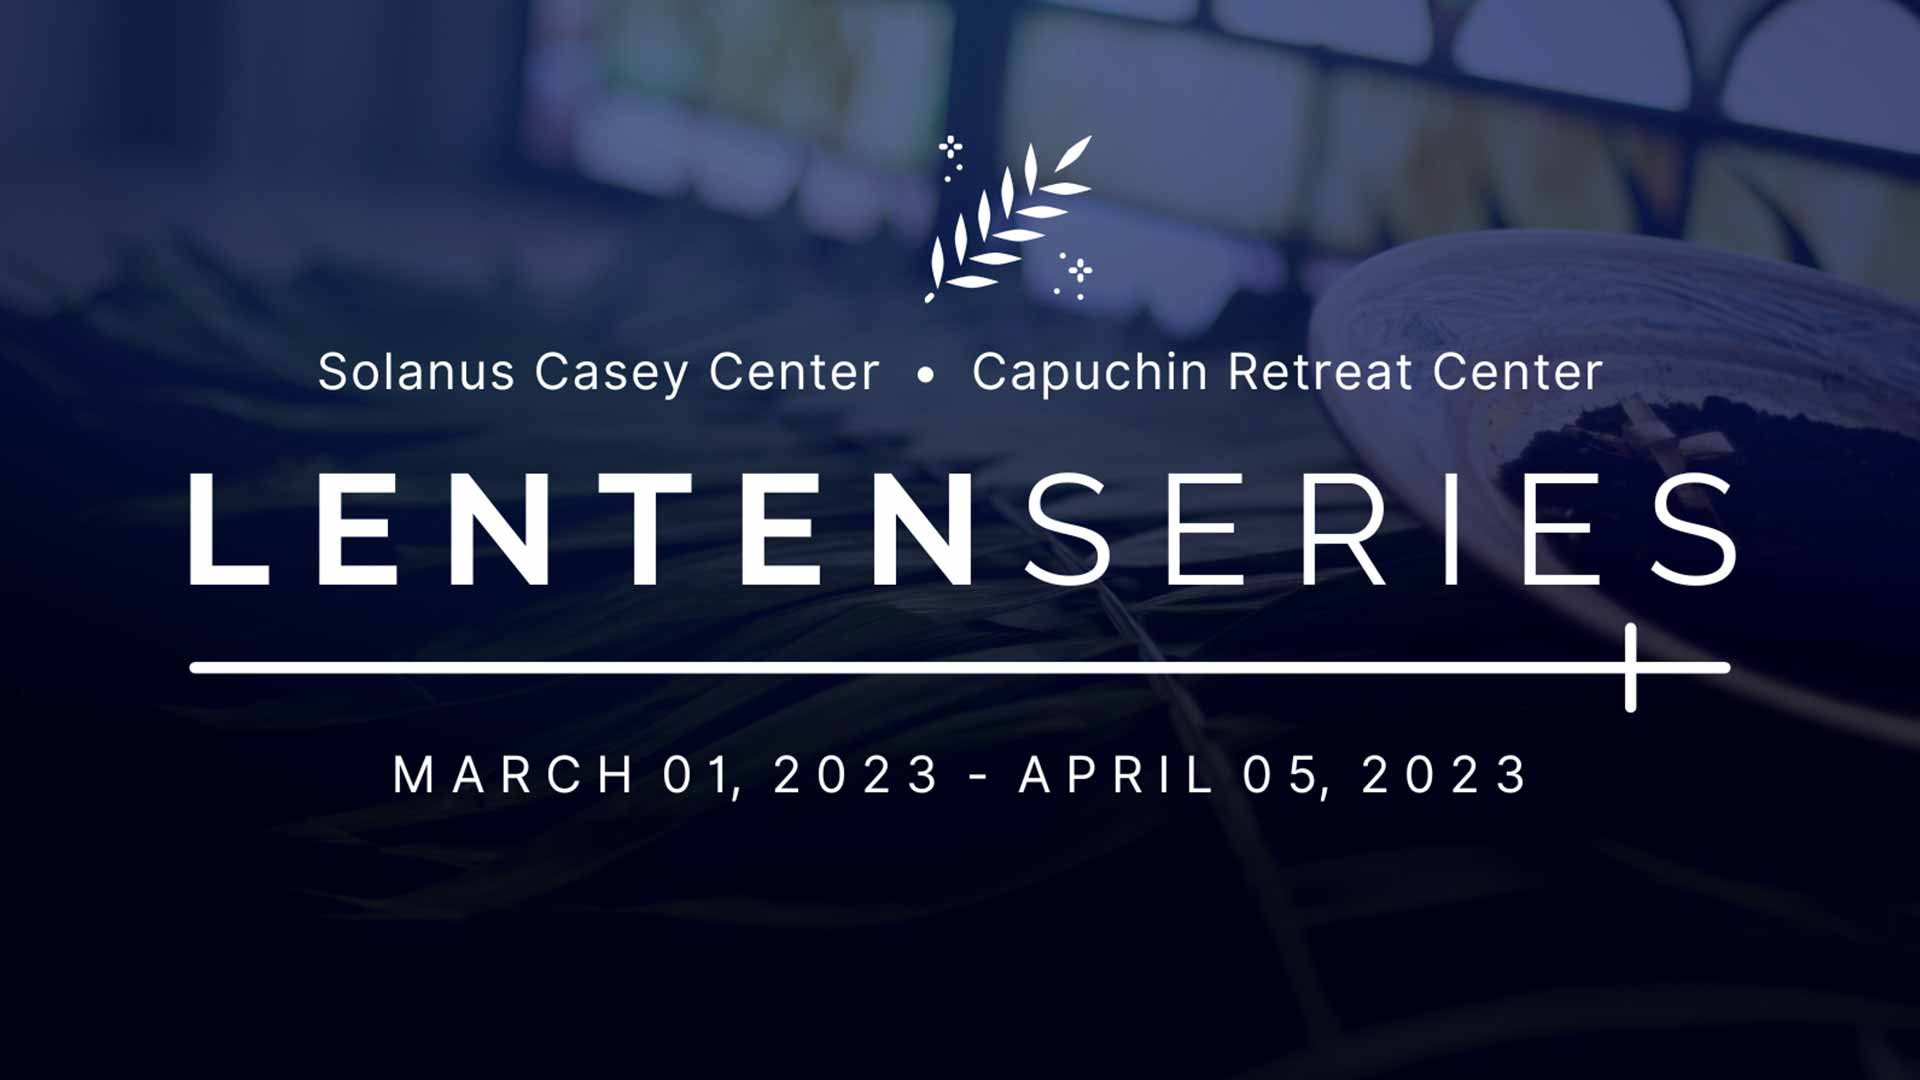 A designed graphic with the text: "Solanus Casey Center and Capuchin Retreat Center Lenten Series"